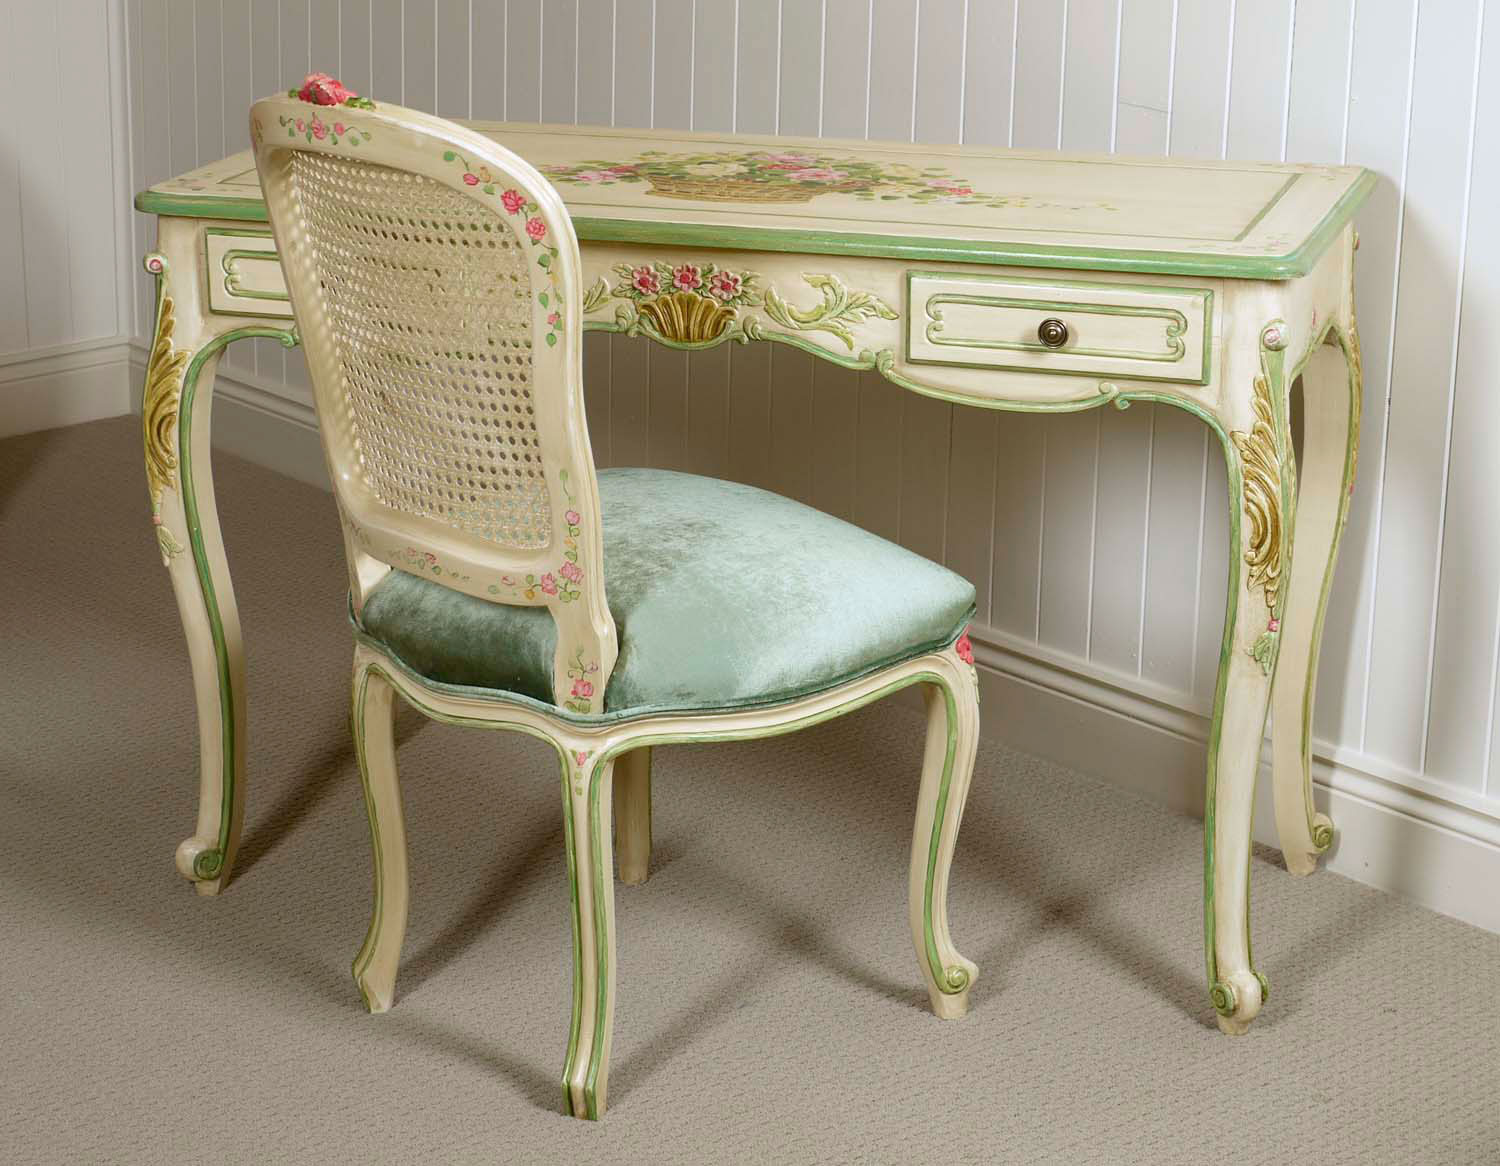 18 French hand-painted and decorative furniture finishes